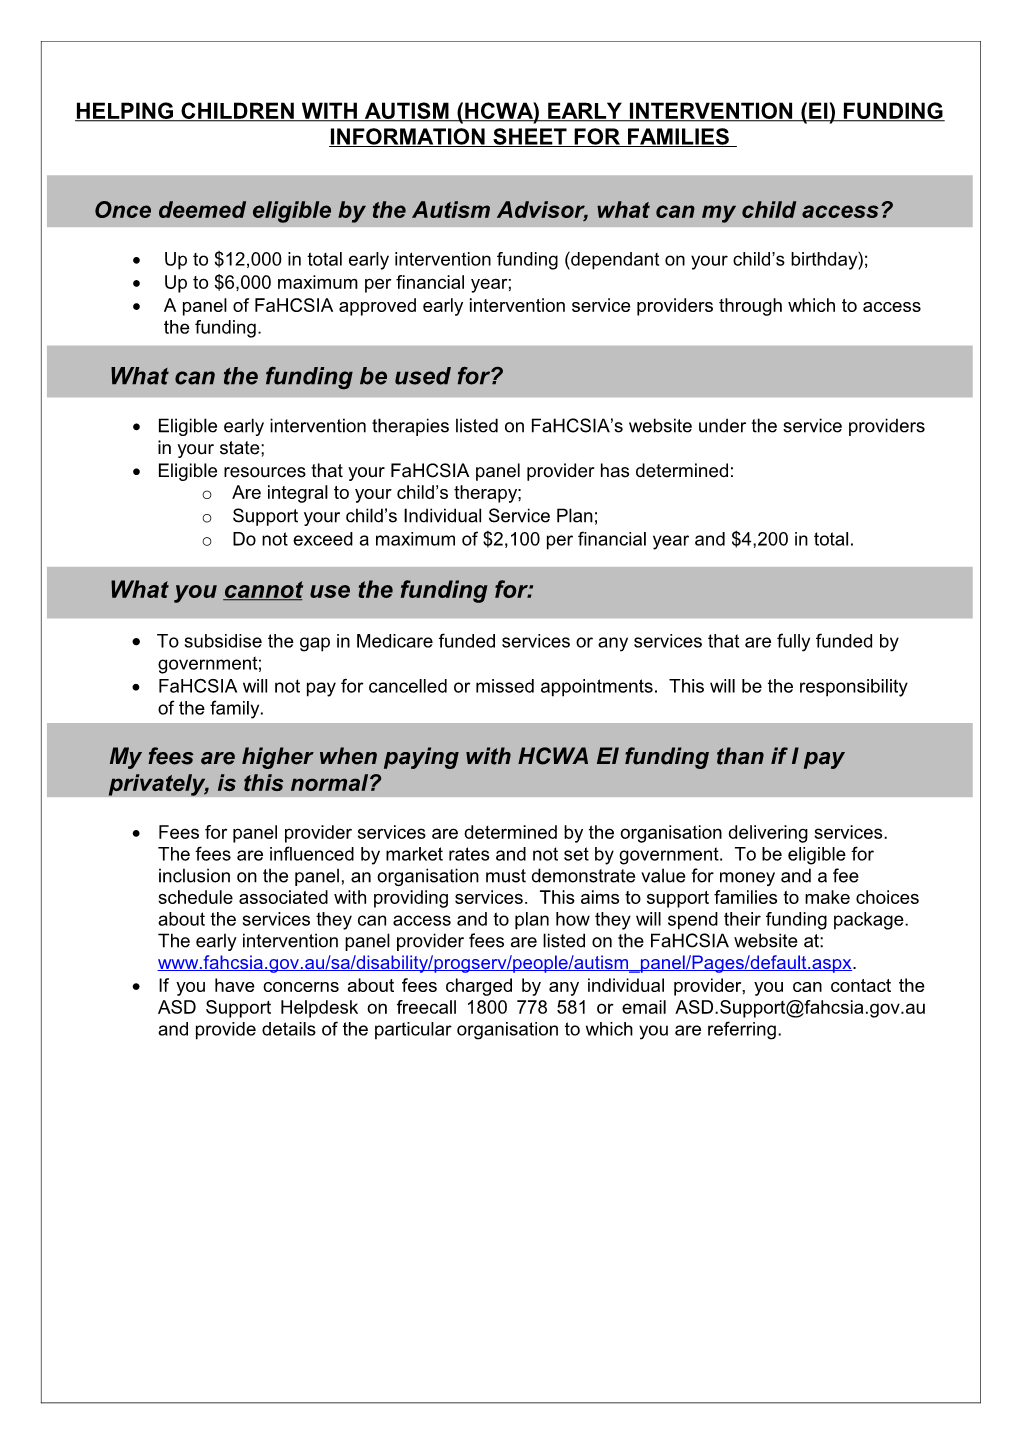 Information Sheet for Families